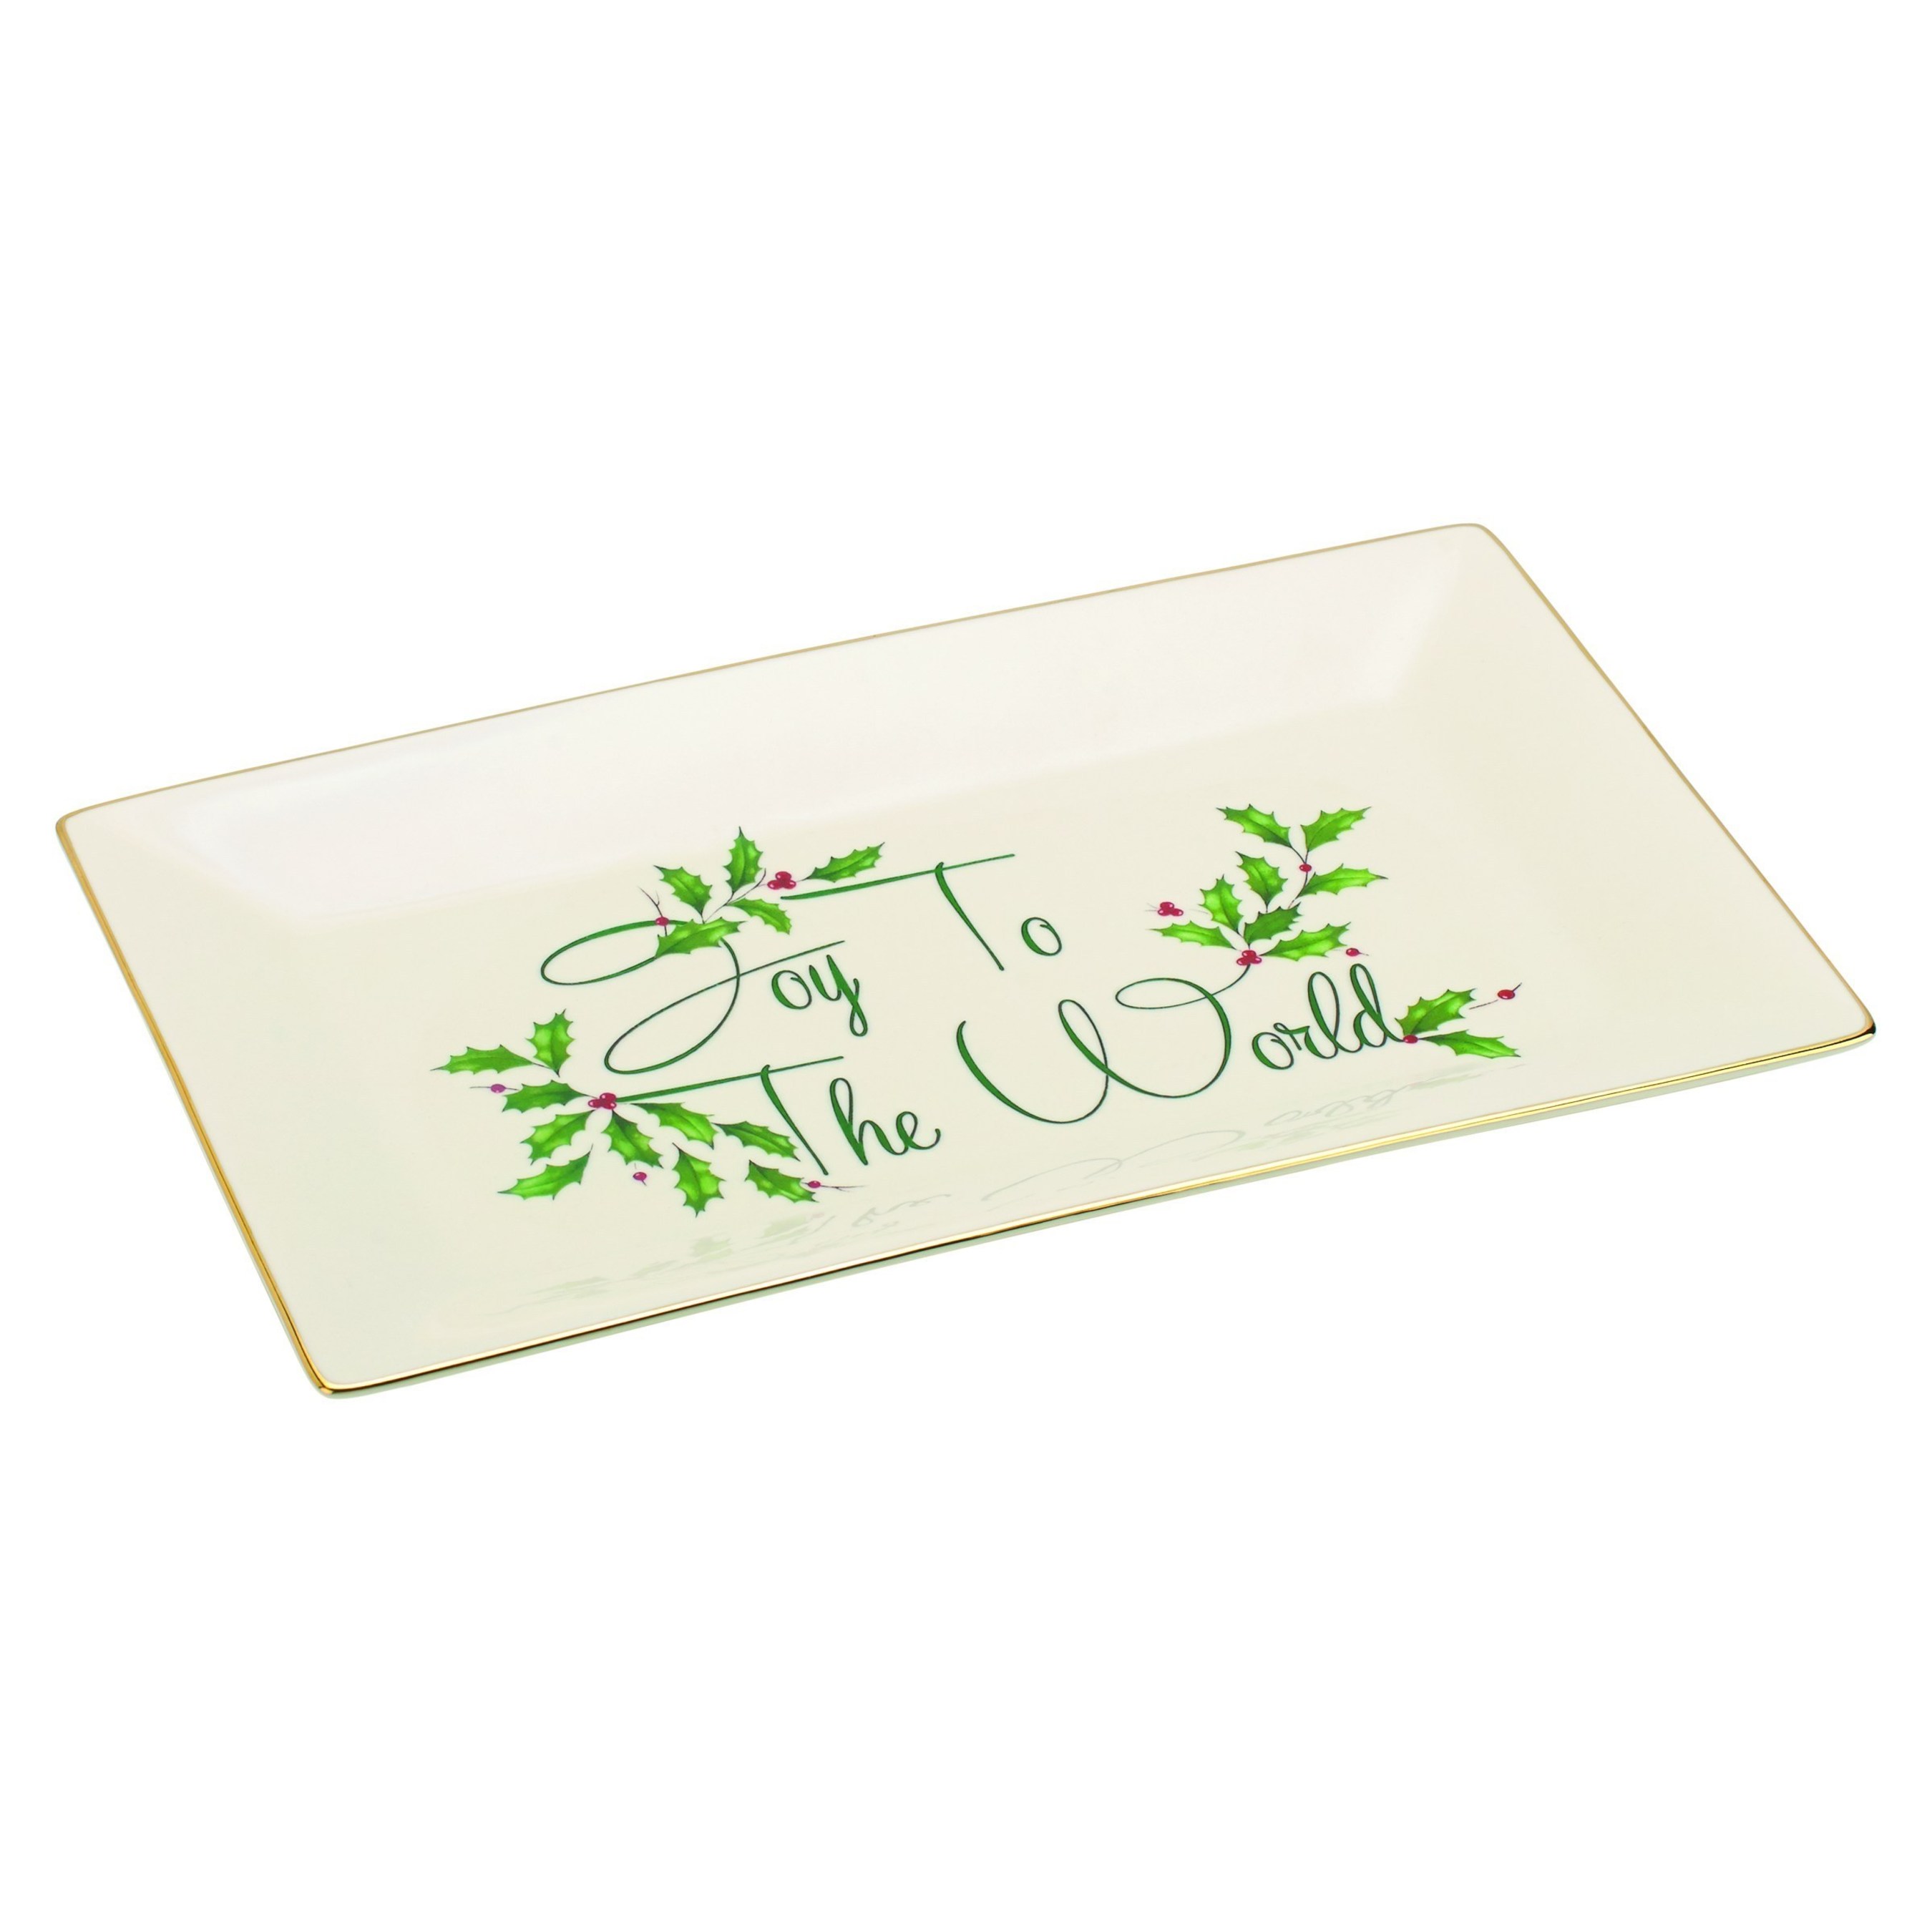 Lenox Holiday Joy to the World Tray - Perfect for entertaining, this porcelain tray is trimmed in gold and holly to match the popular Holiday dinnerware.